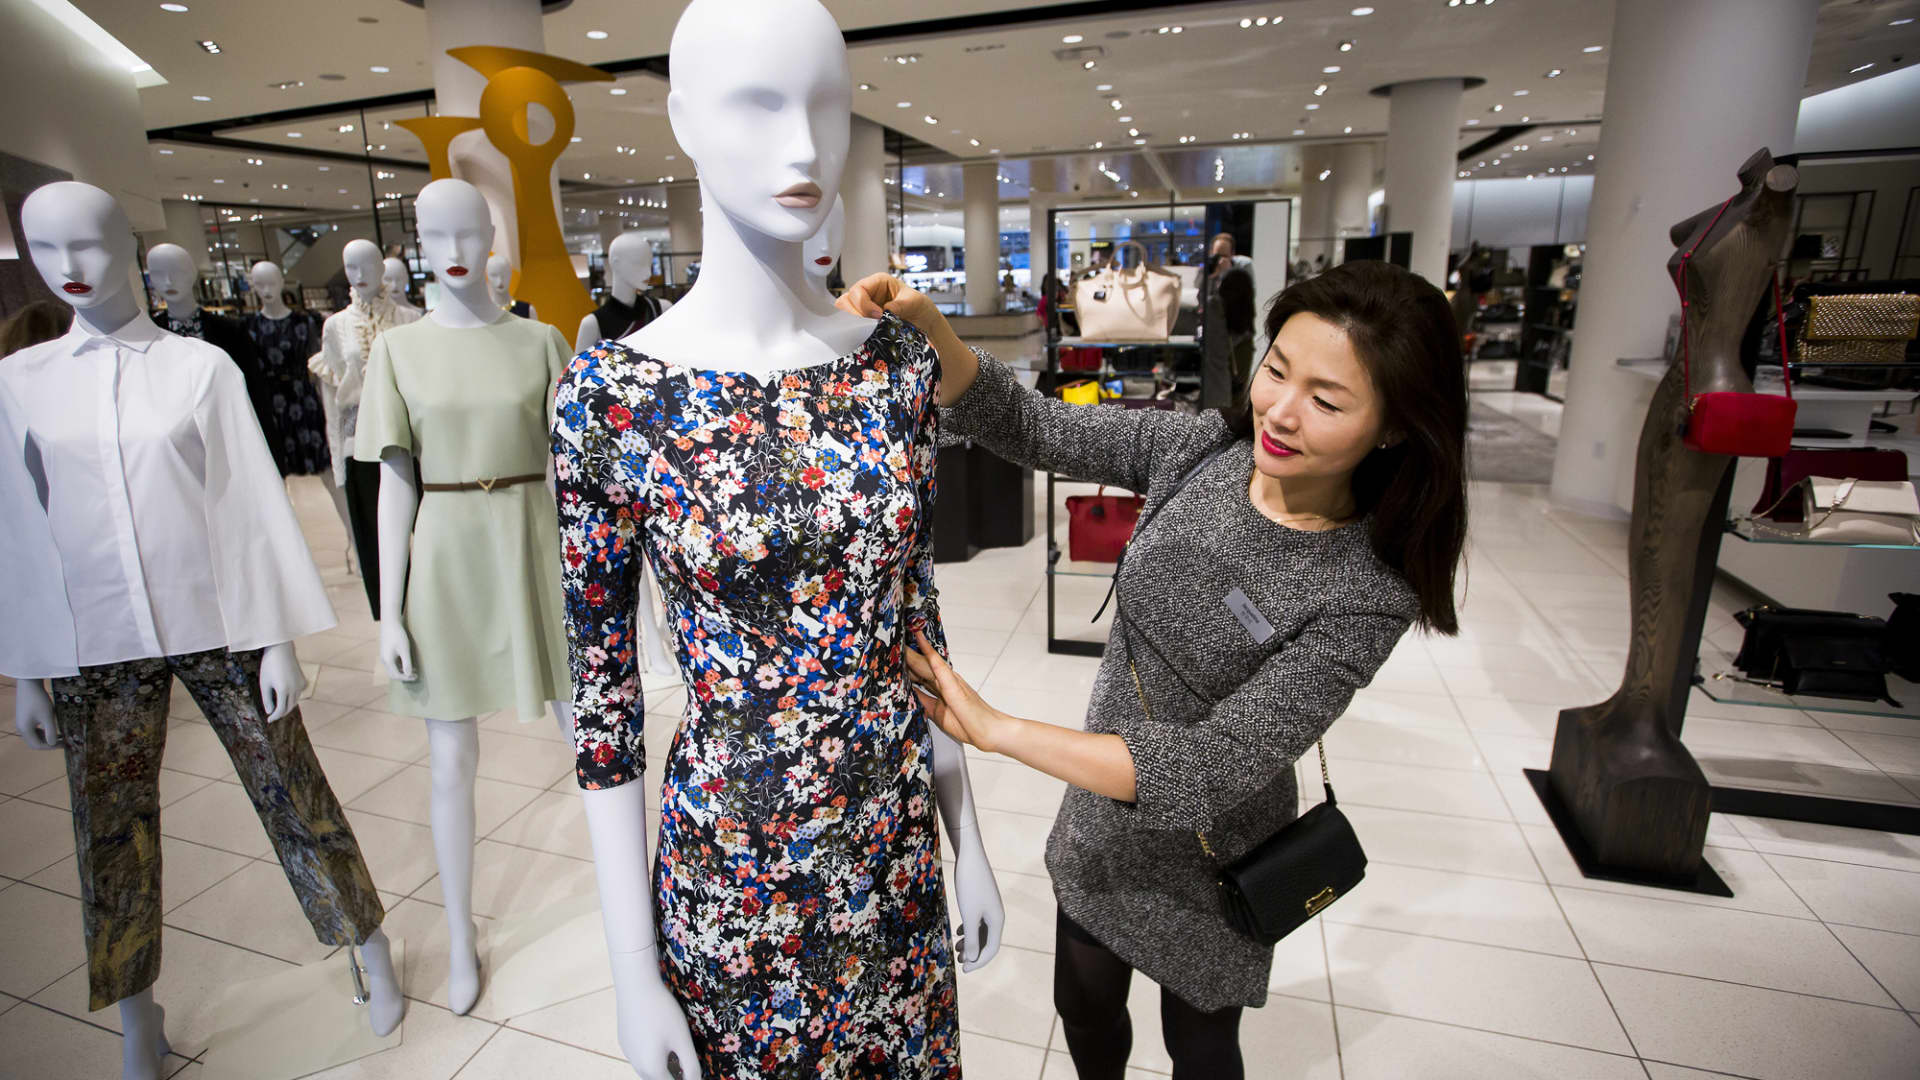 Mannequins in retail stores, like in Nordstrom pictured here, are meant to draw shoppers in and inspire customers to put together similar outfits.